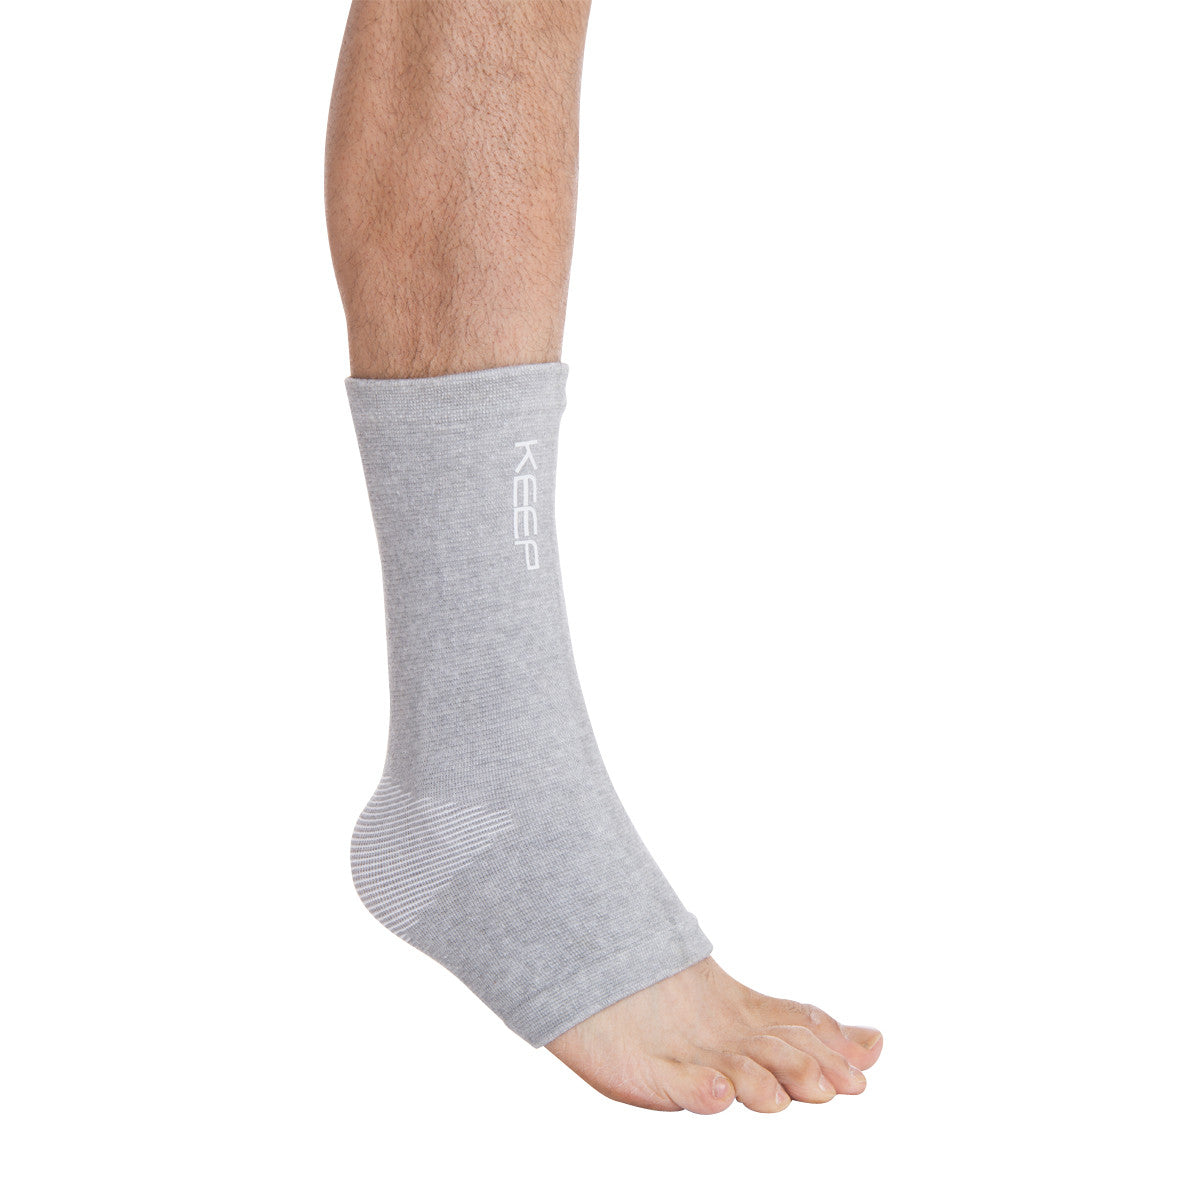 Total Ankle Support - L/XL